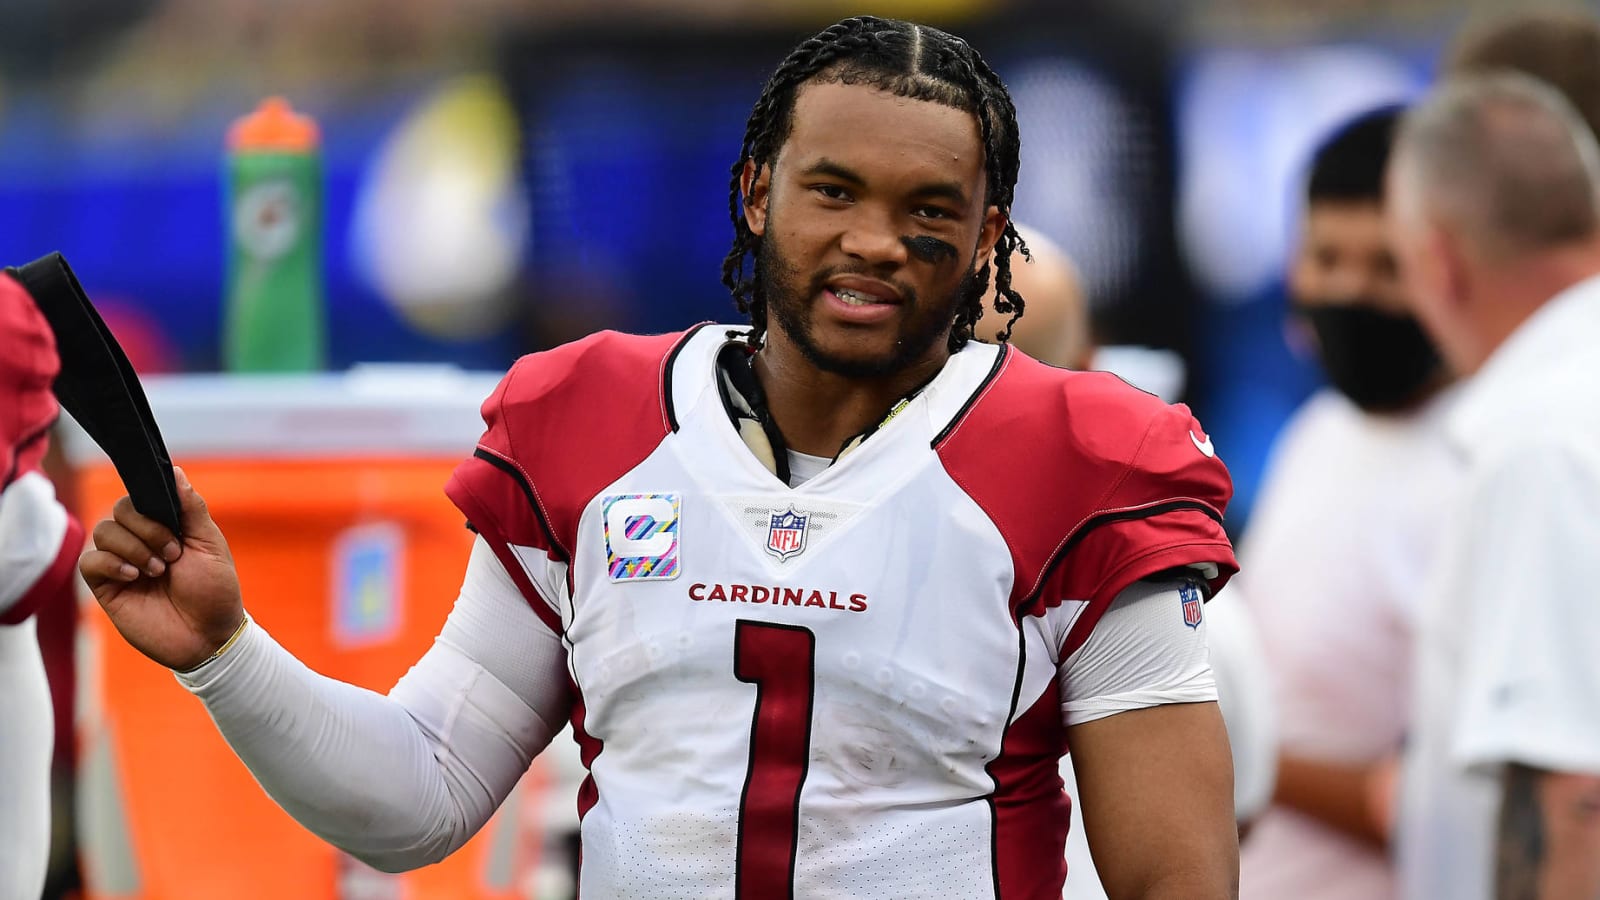 Petition gaining steam for Arizona Cardinals to change uniforms